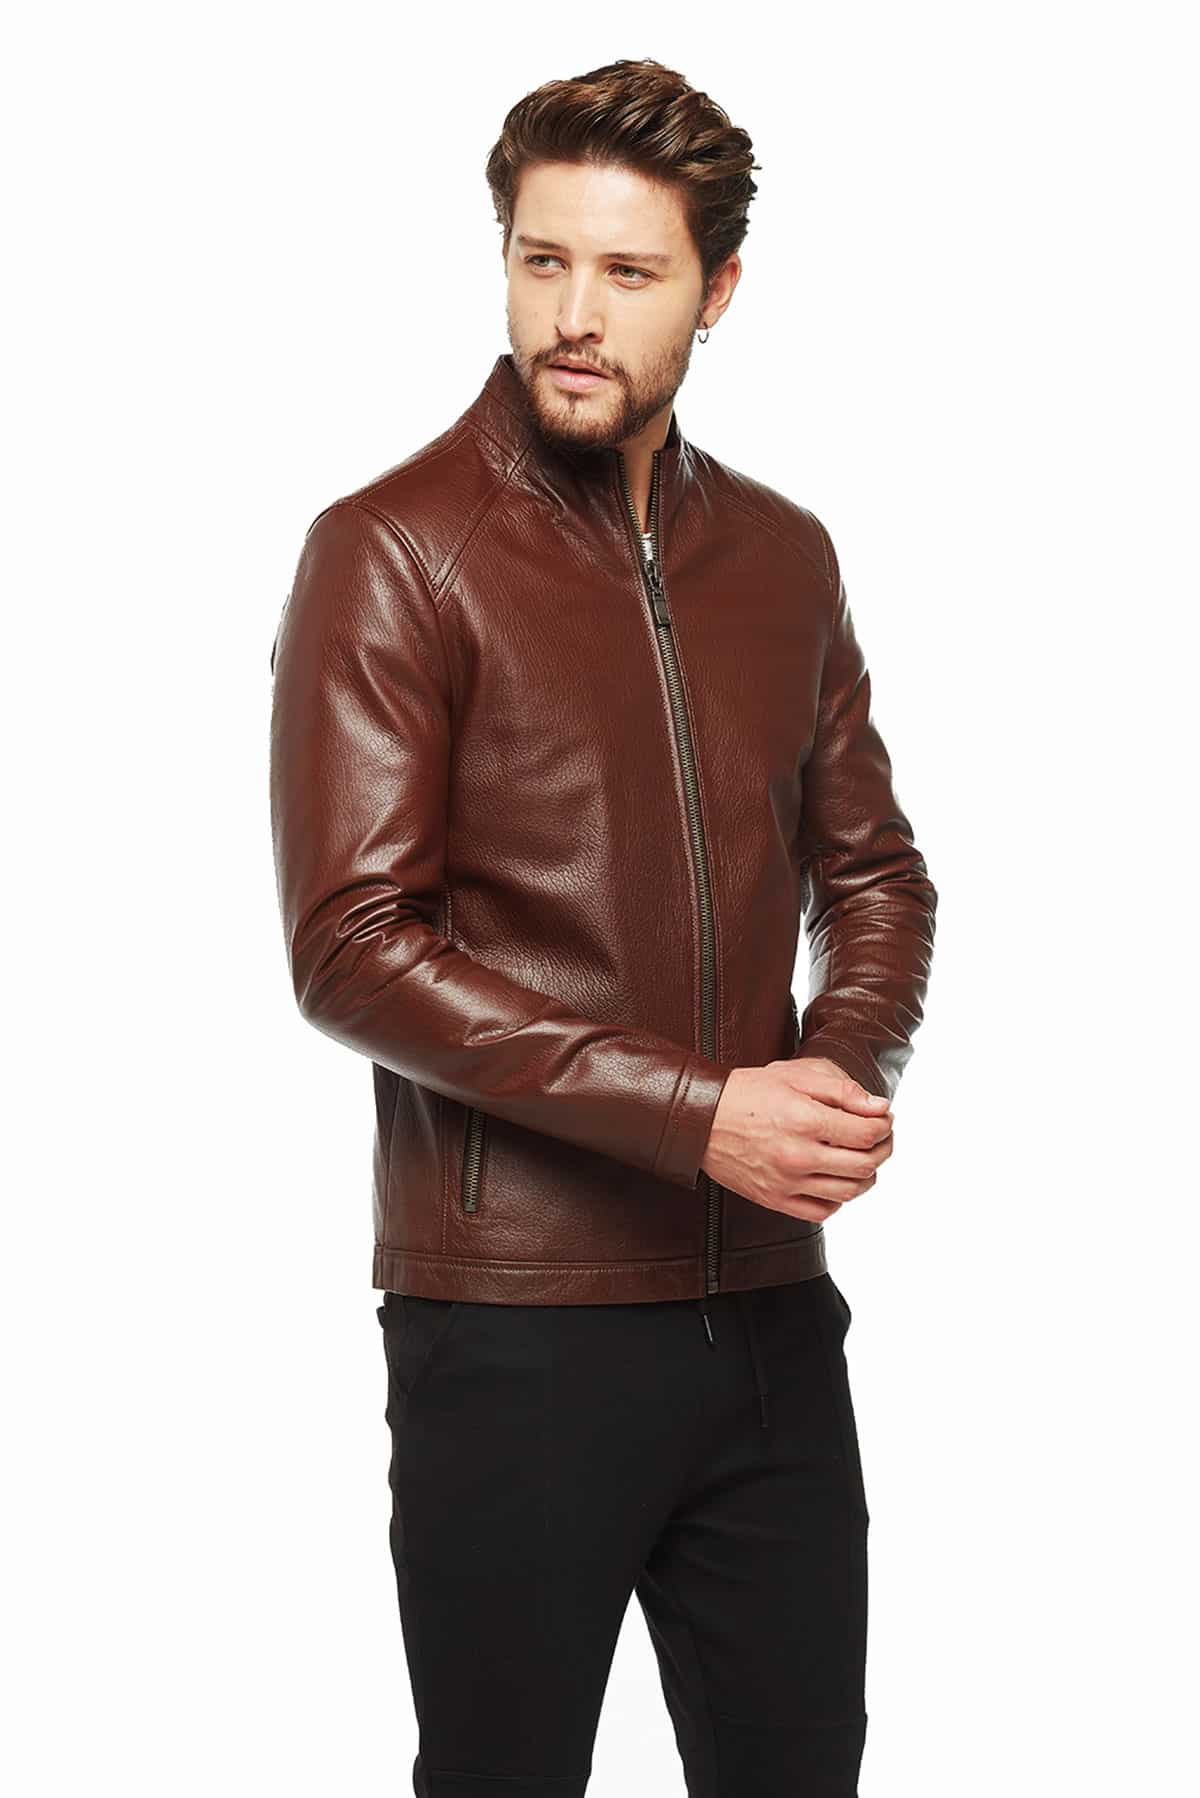 Argen Men's 100 % Real Whiskey Brown Leather New Zealand Jacket